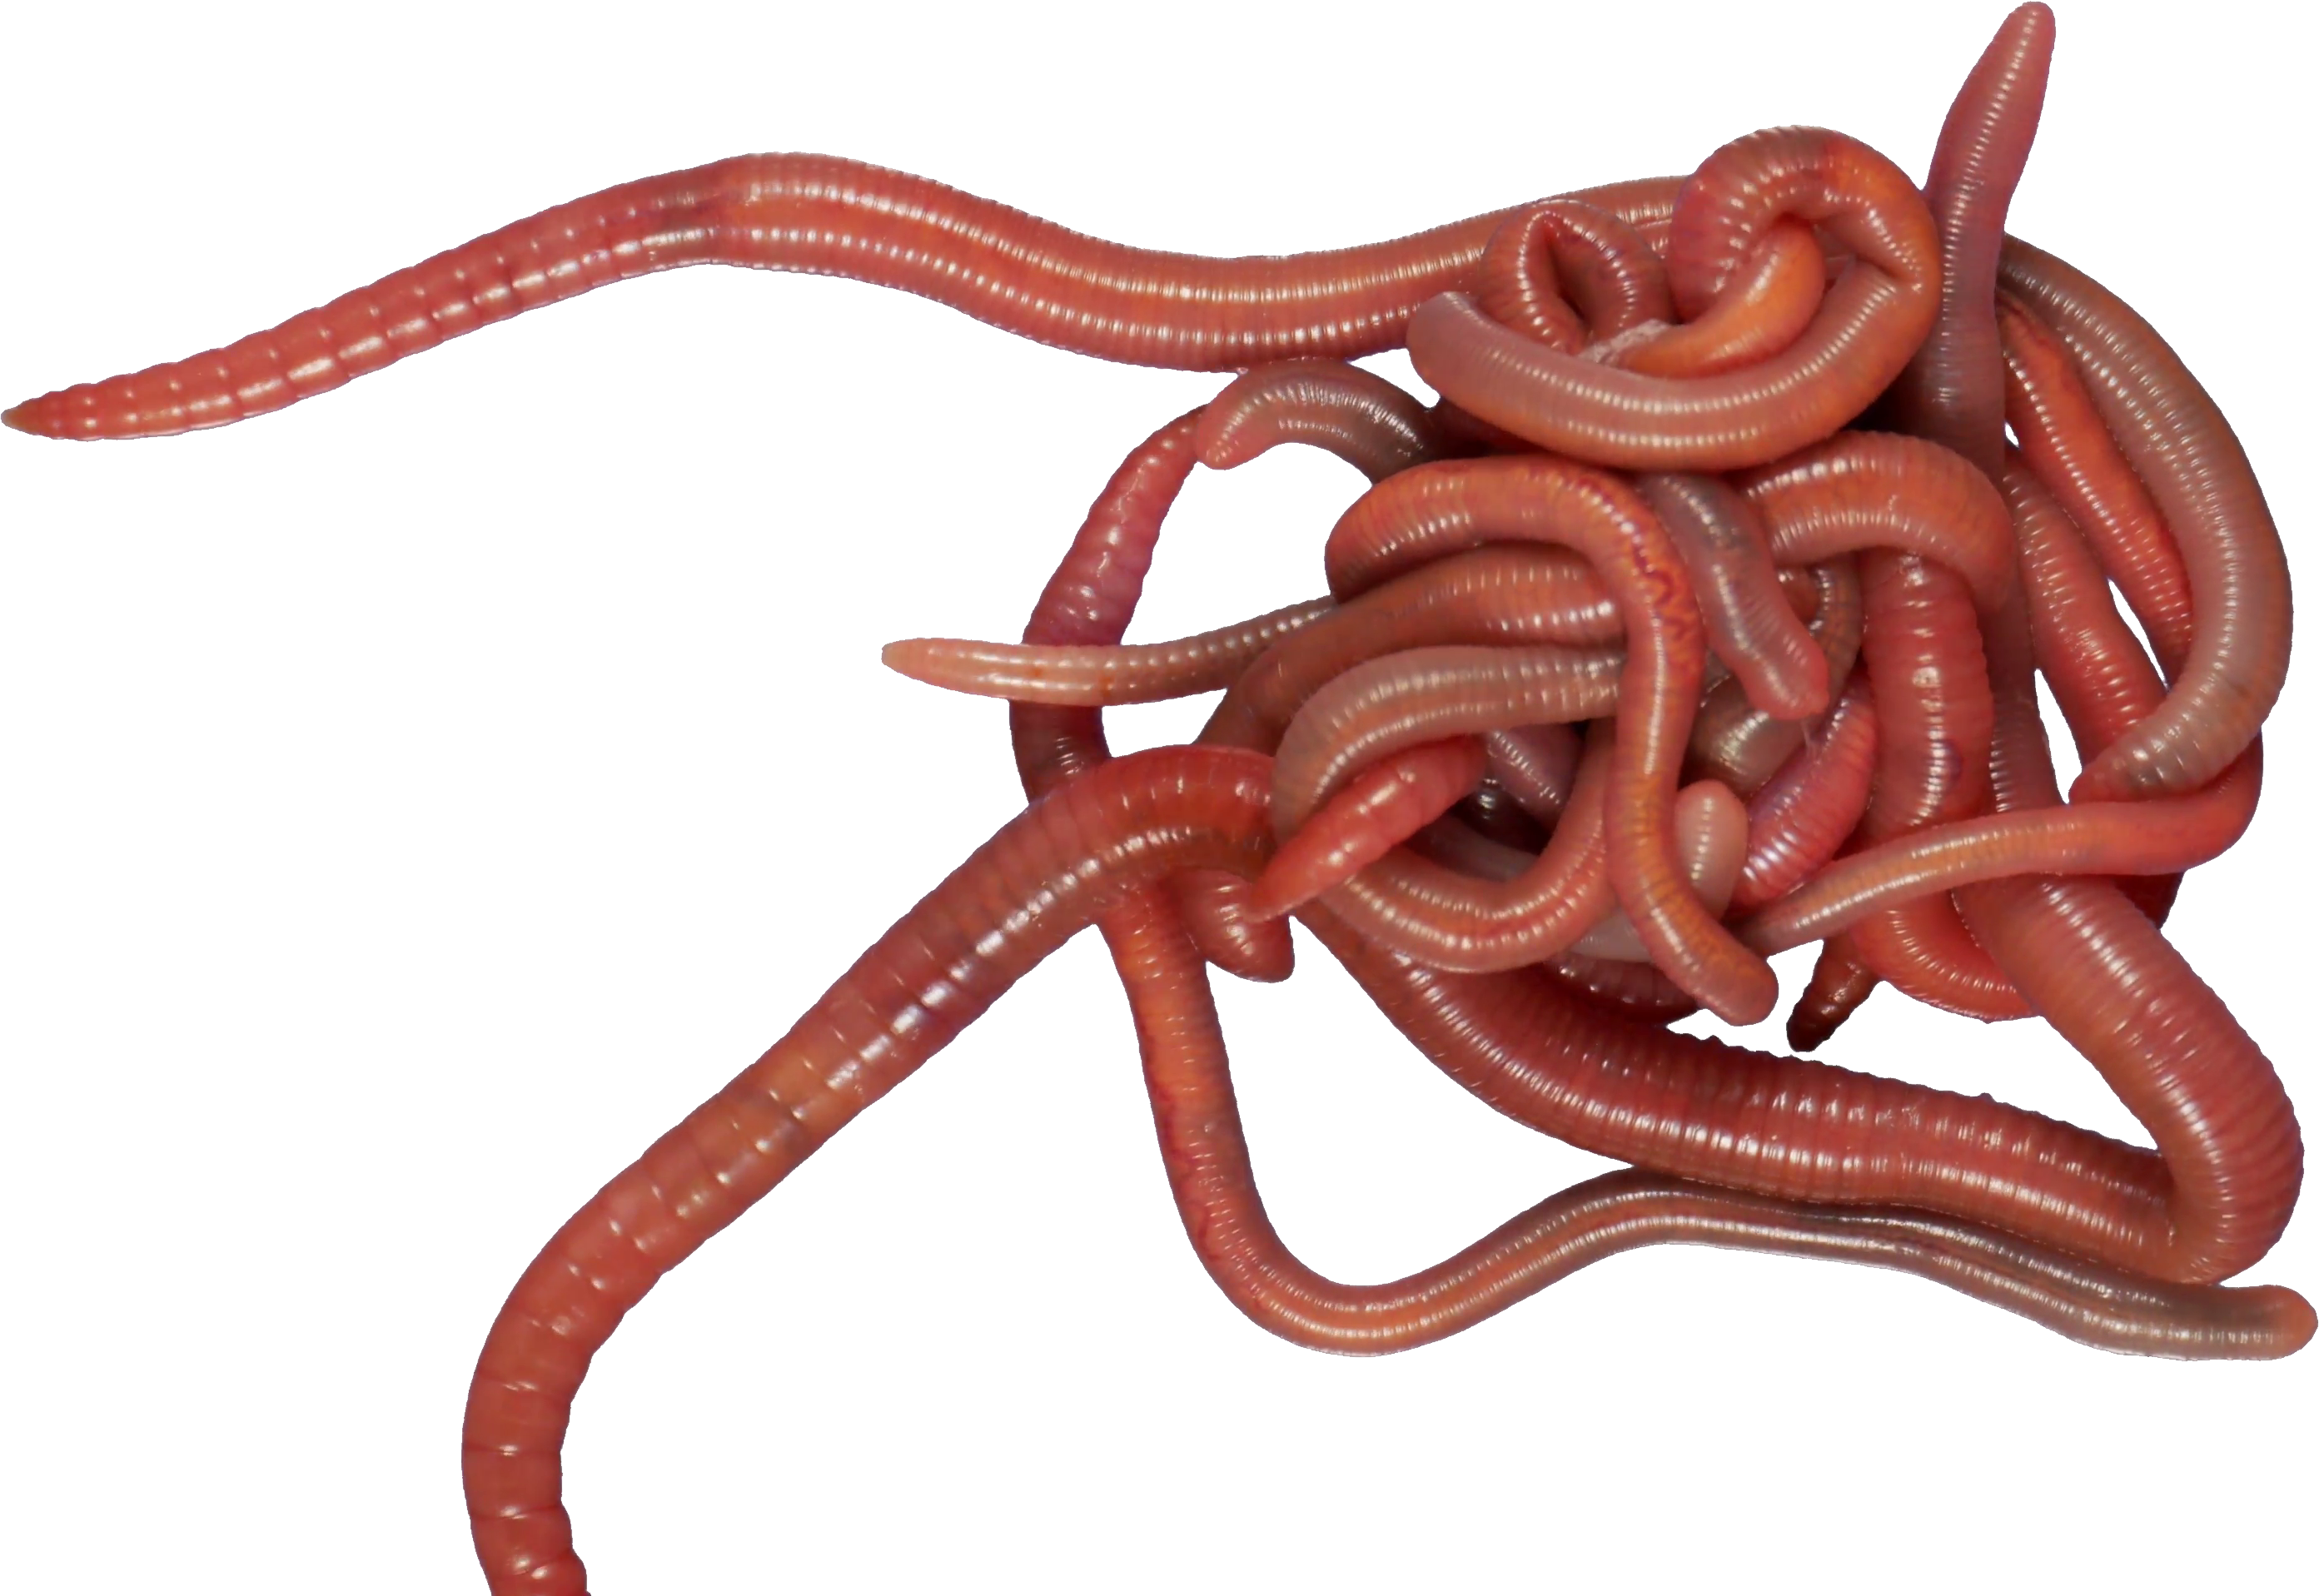 Earthworm png . Worm clipart annelida